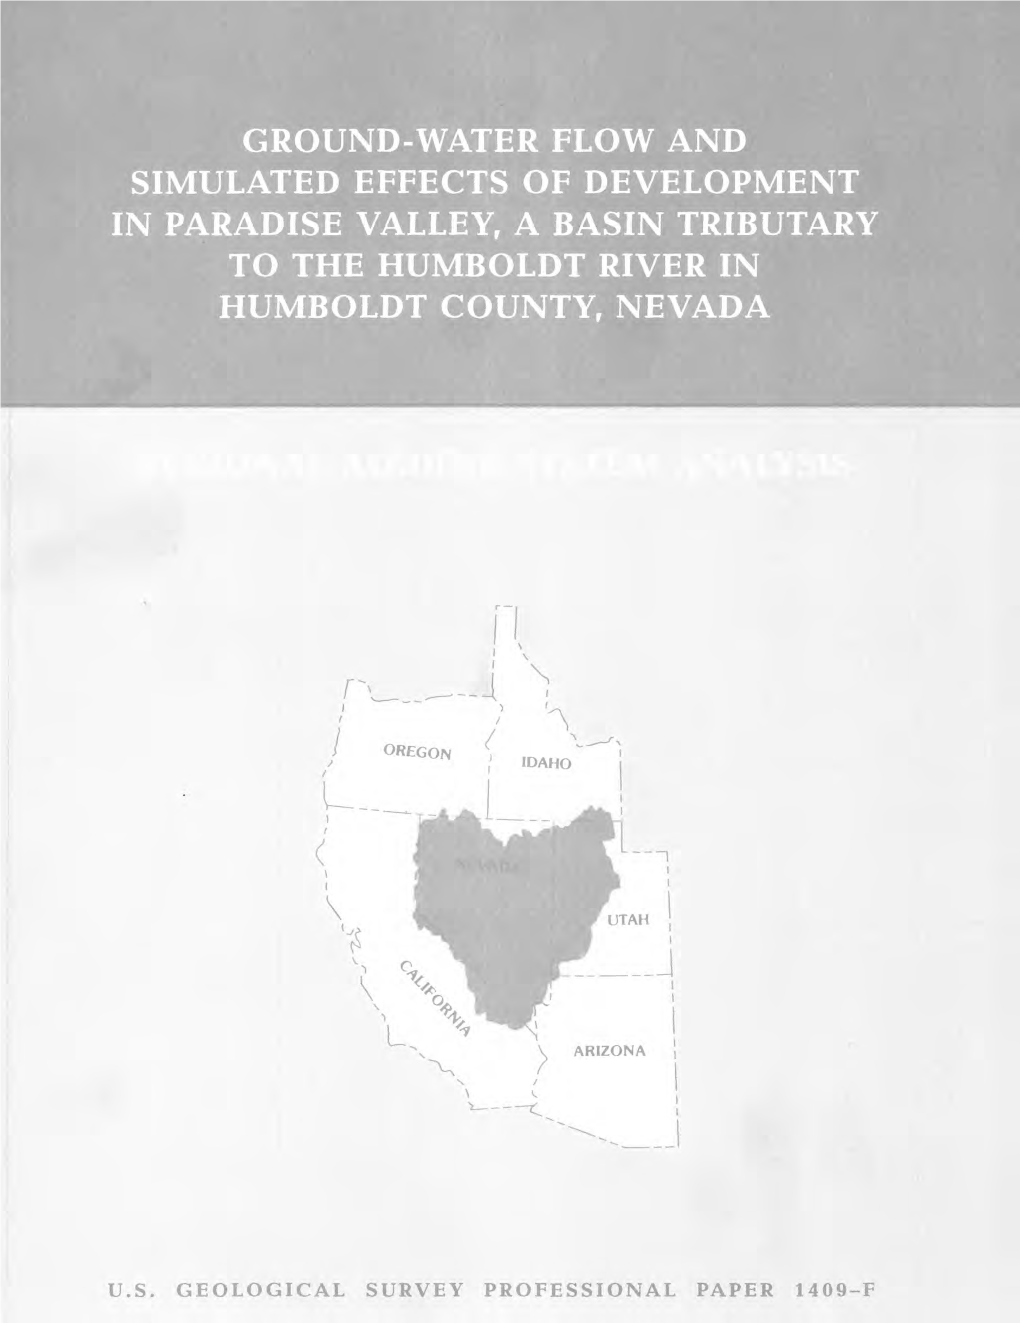 Ground-Water Flow and Simulated Effects of Development in Paradise Valley, a Basin Tributary to the Humboldt River in Humboldt County, Nevada